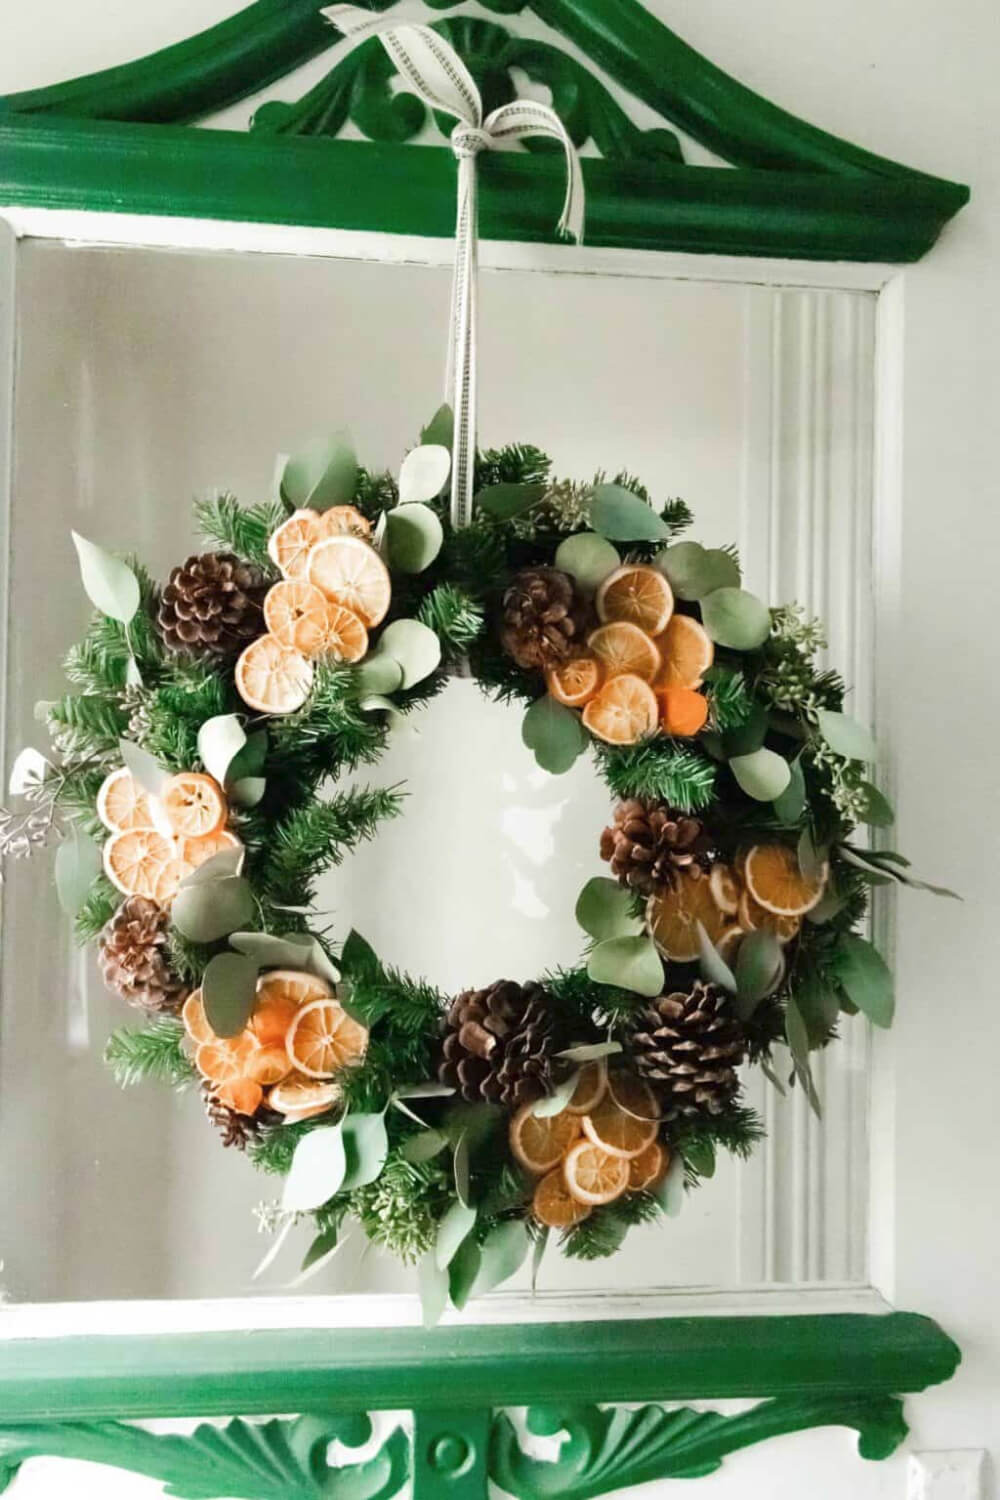 In The Love Of Home Files #10, this is a  dried orange and eucalyptus wreath